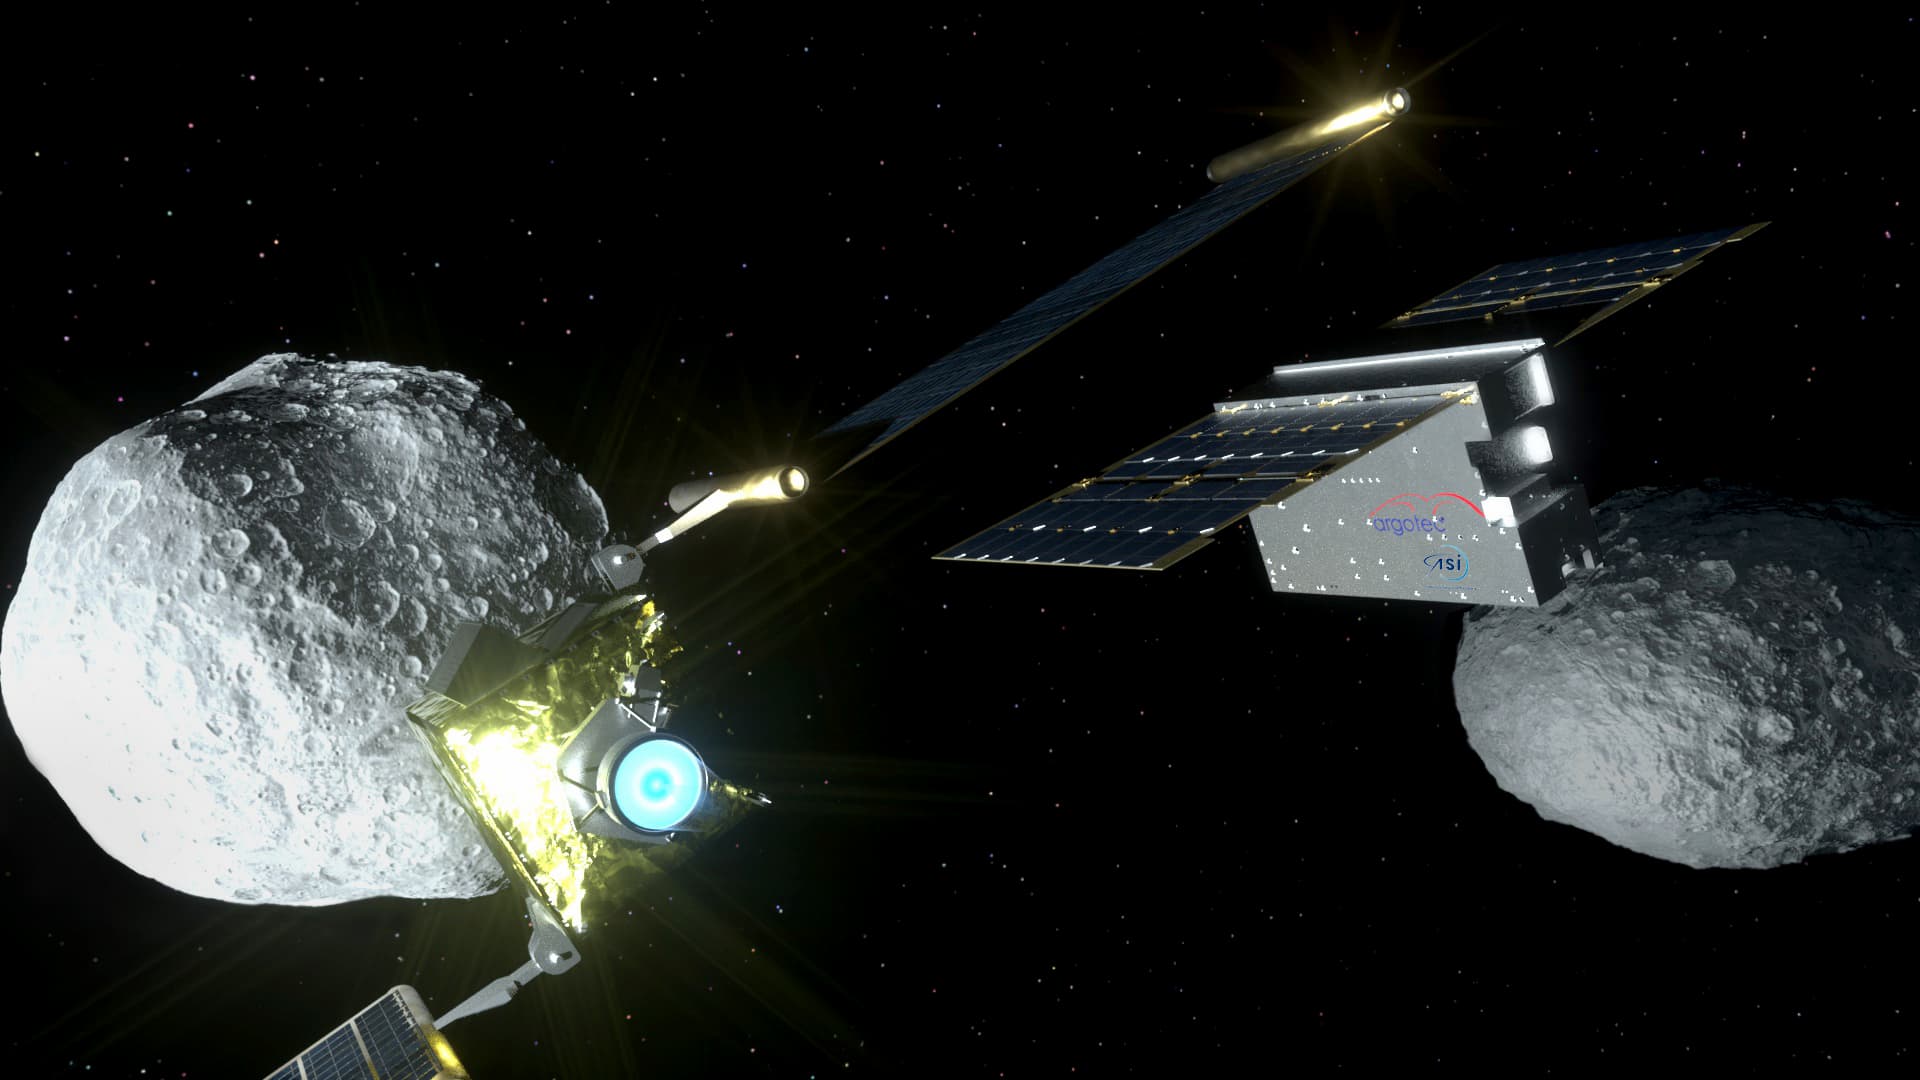 LICIACube flies with DART towards the asteroid. An Italian special envoy to the deep space